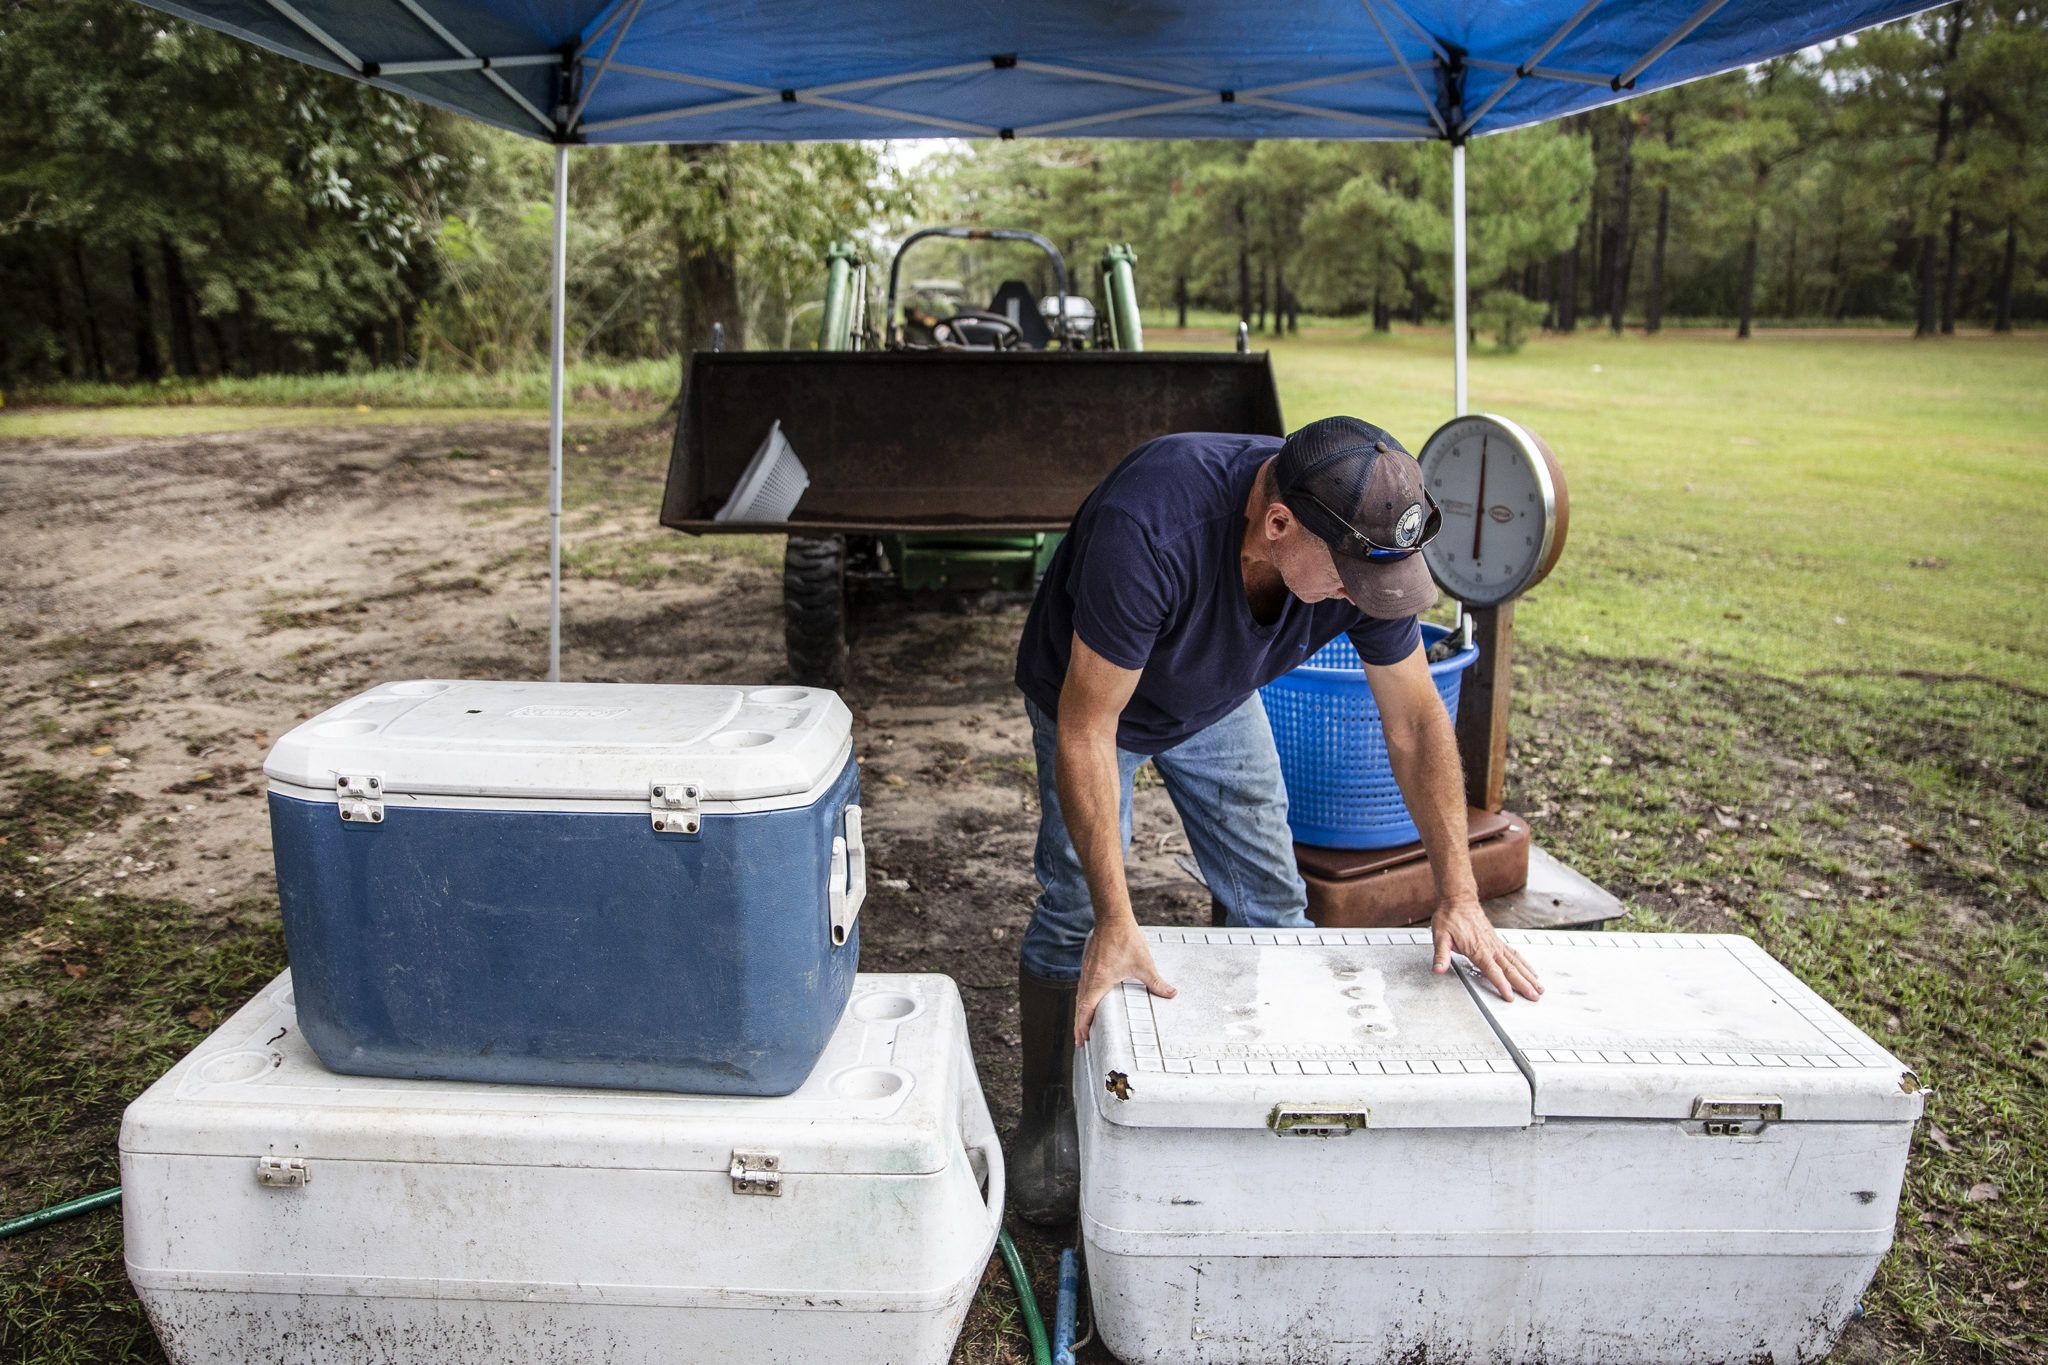 Fisherman Chad Stork sells shrimp from his home in Lucedale. Image by Eric J. Shelton for Mississippi Today. United States, 2019.